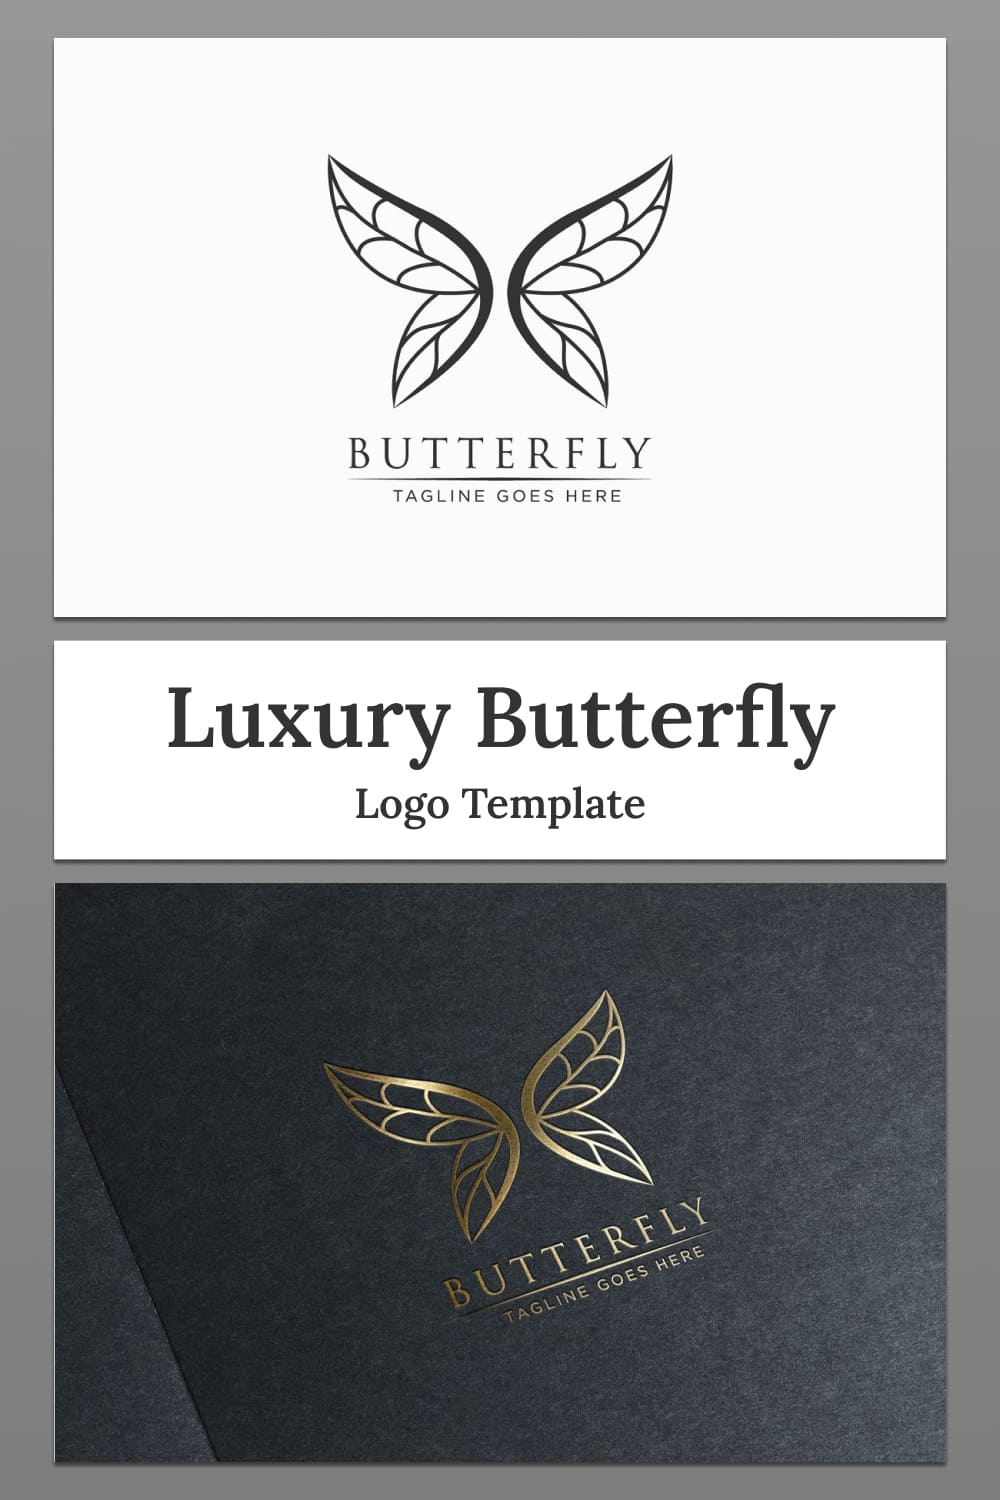 luxury butterfly logo template, unique design for your brand.